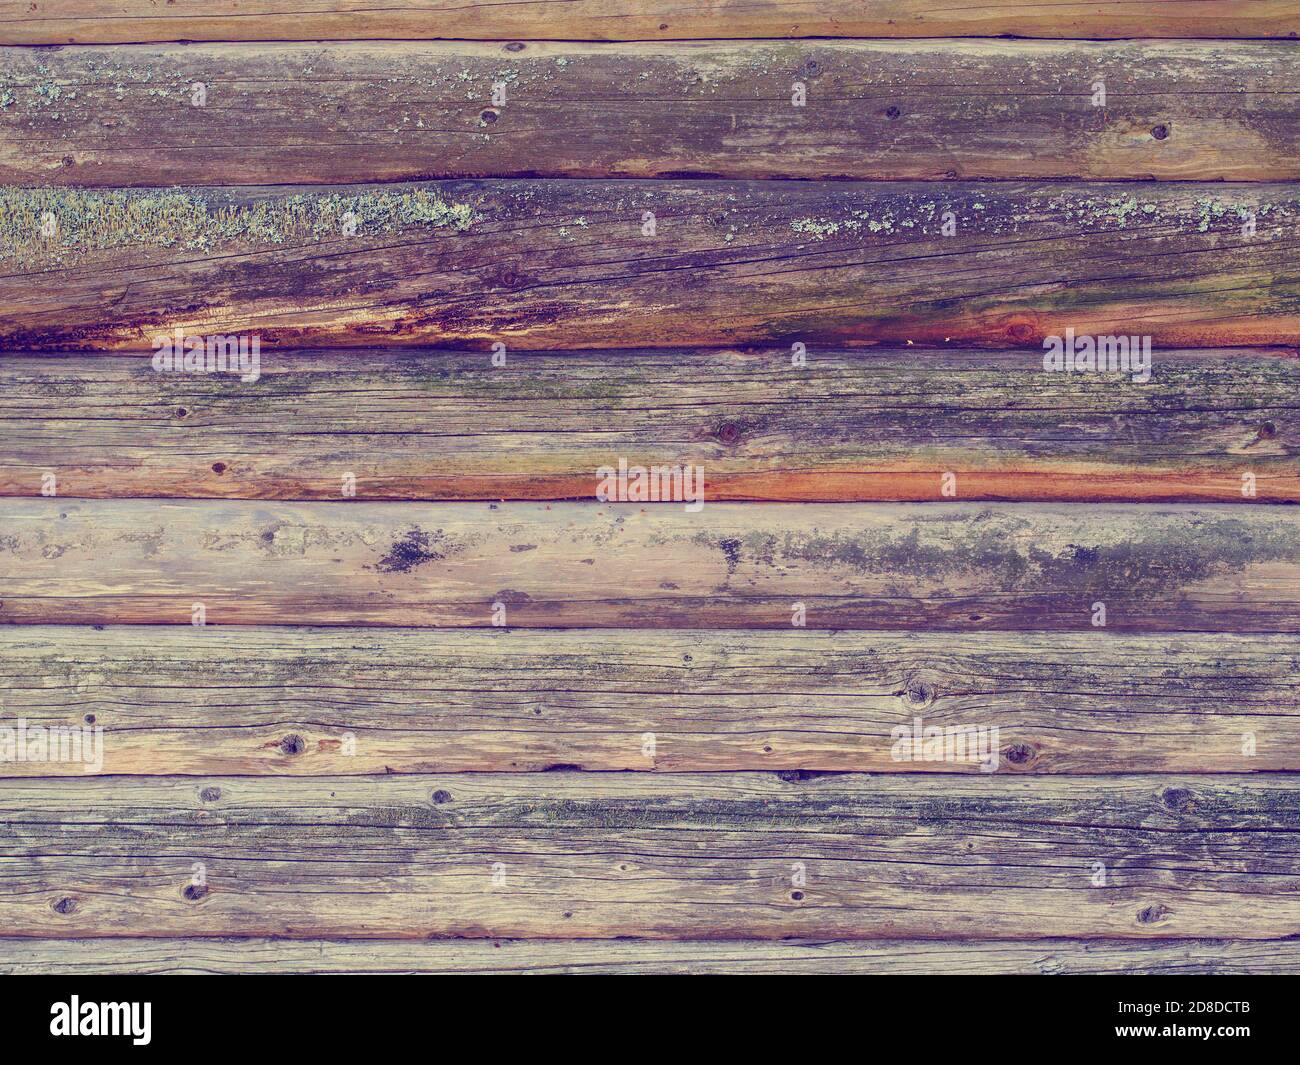 Rough wood log cabin wall background, instagram style Stock Photo - Alamy